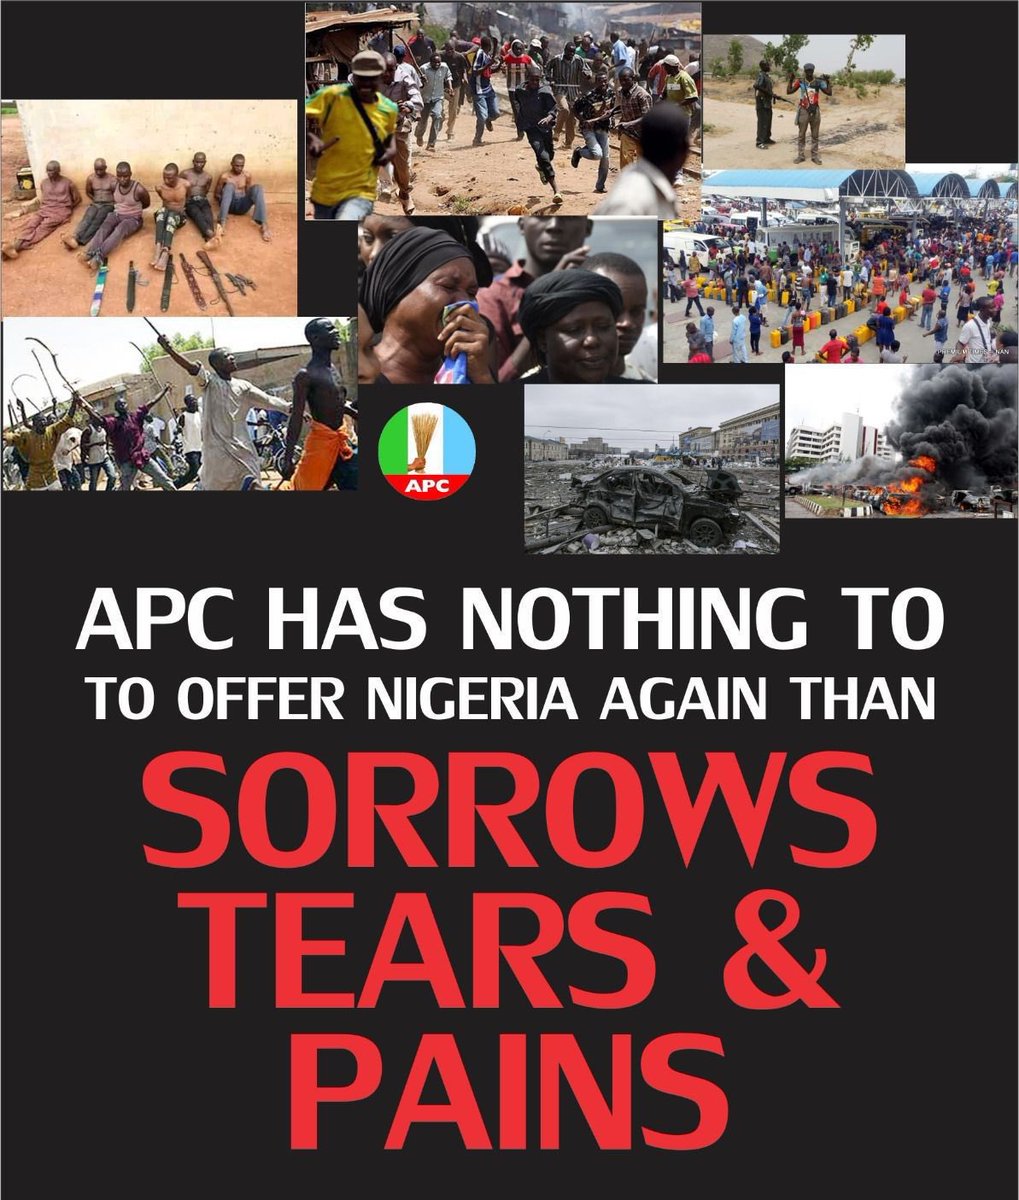 It’s shall never be well with anyone that associate with this party call apc, if they haven’t affected you it’s has affected me,#saynotoapc 🚨